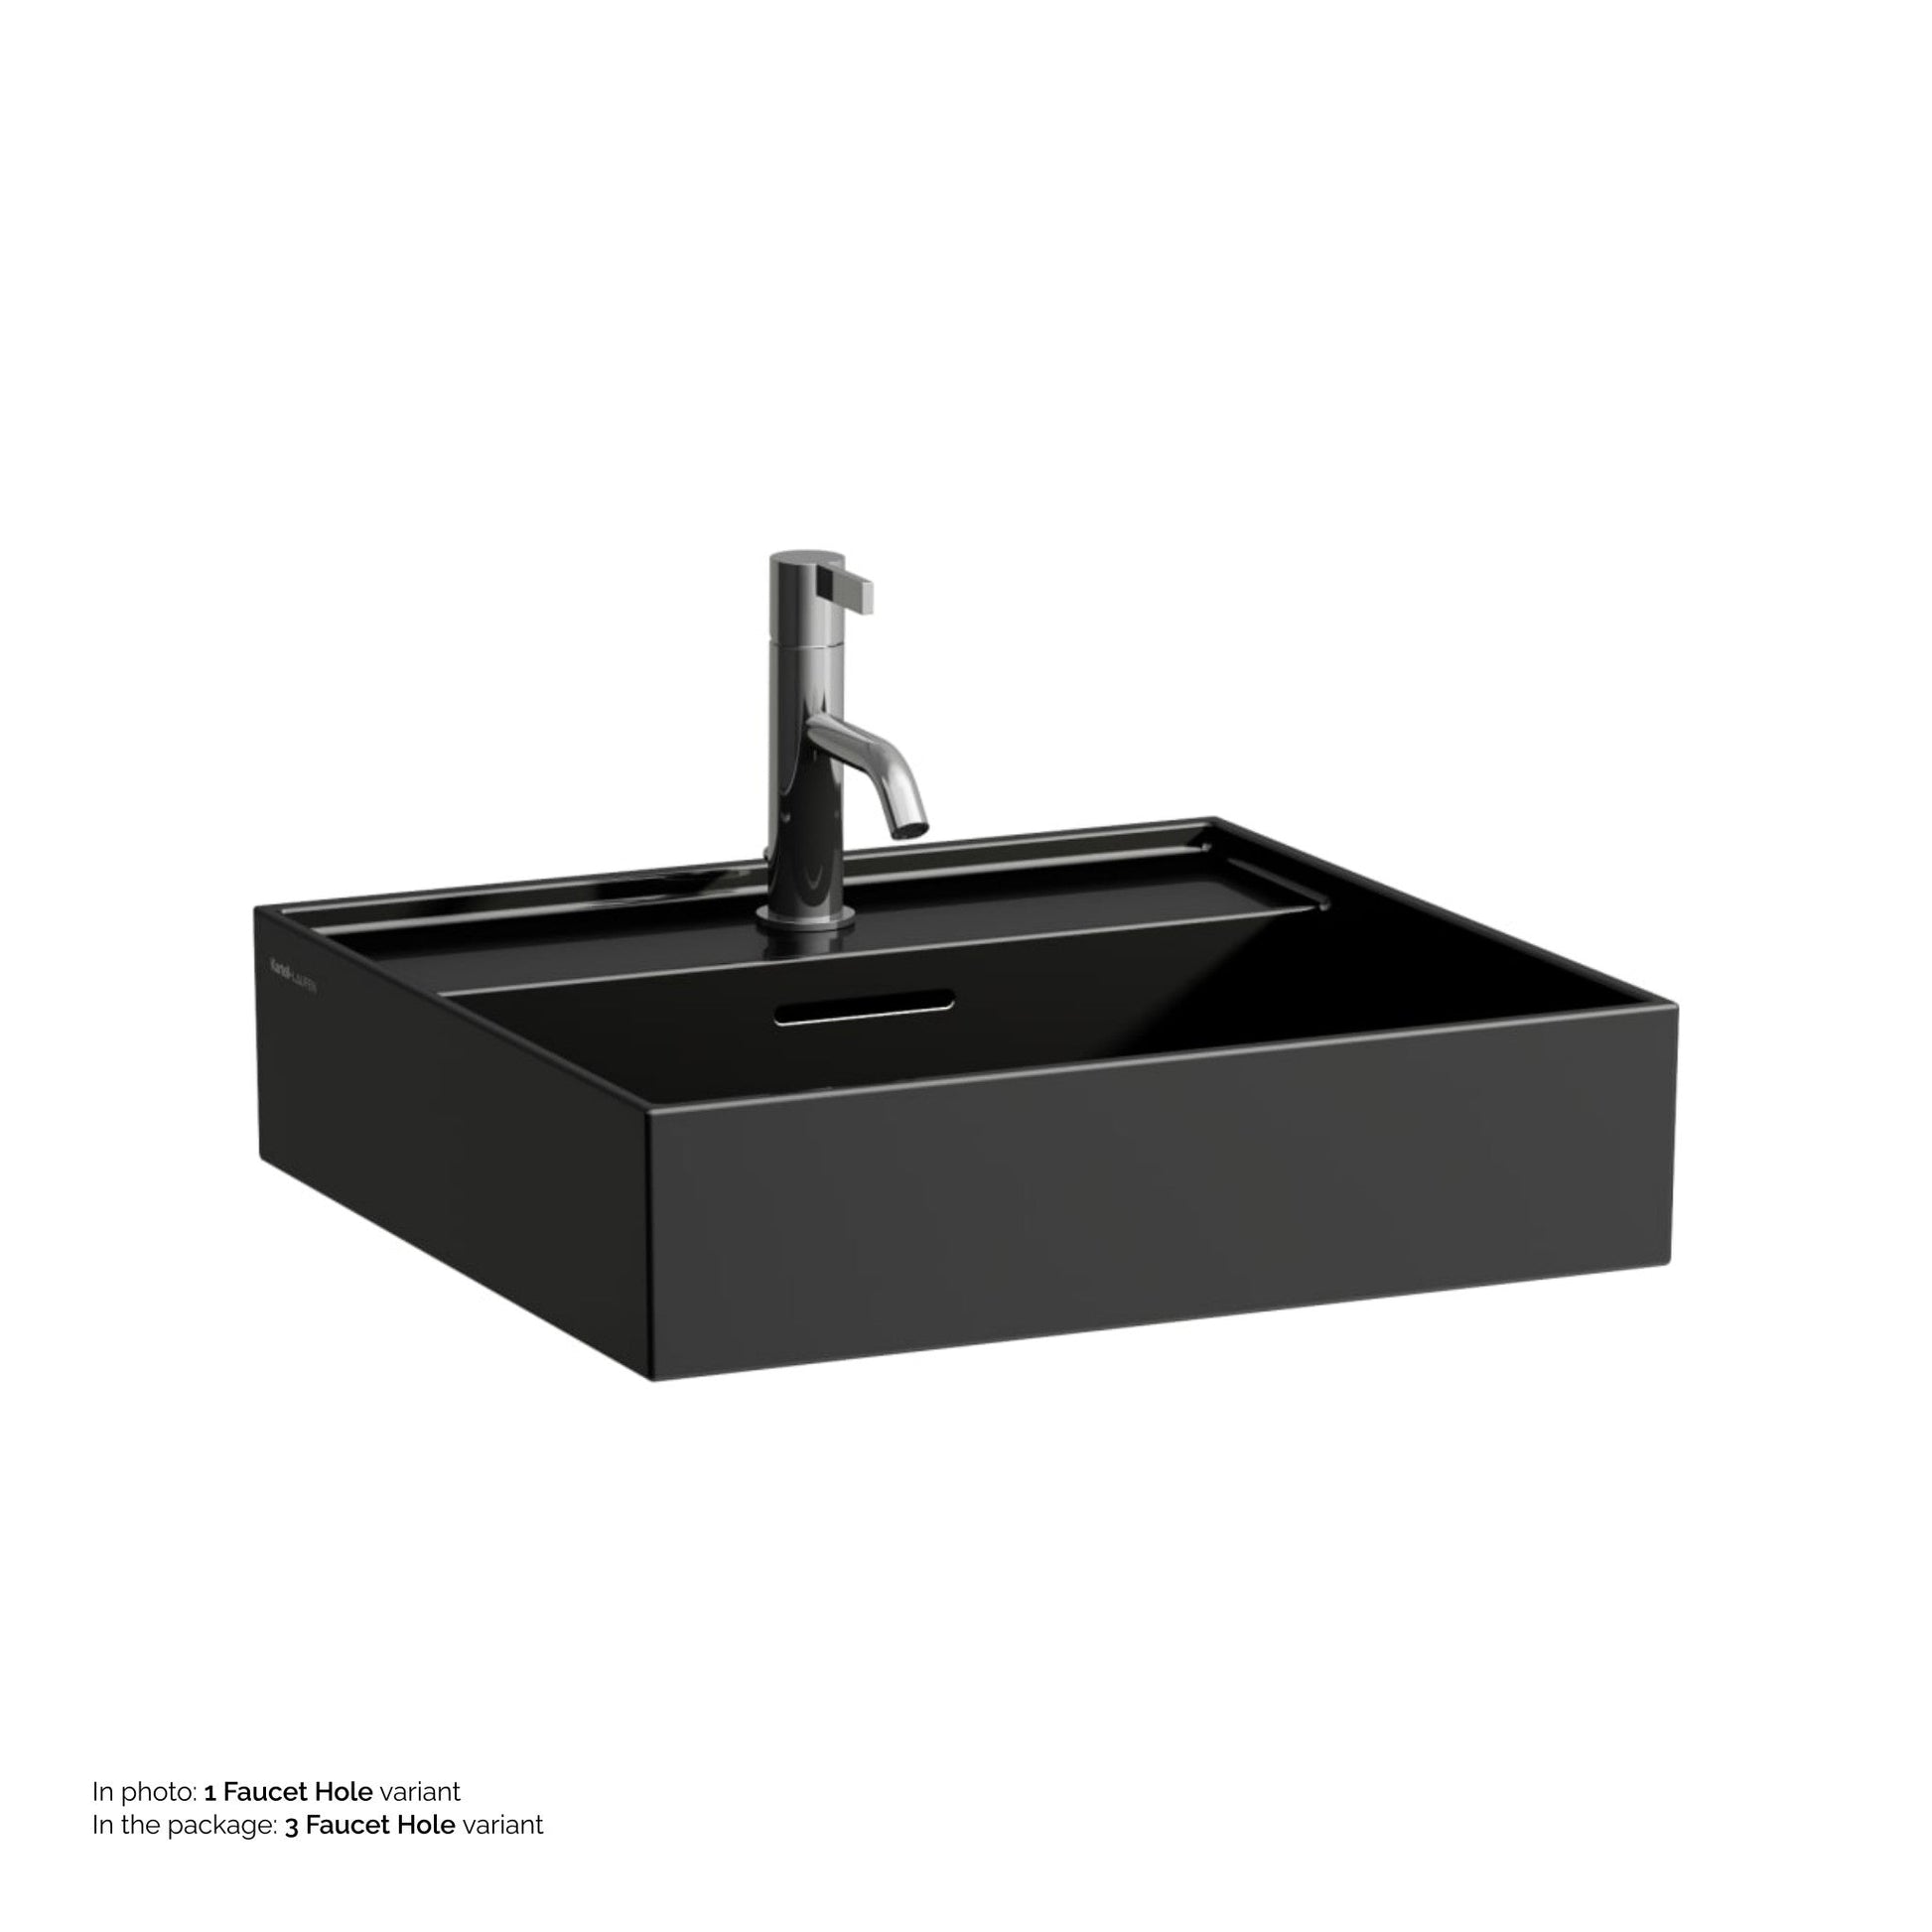 Laufen Kartell 20" x 18" Glossy Black Countertop Bathroom Sink With 3 Faucet Holes